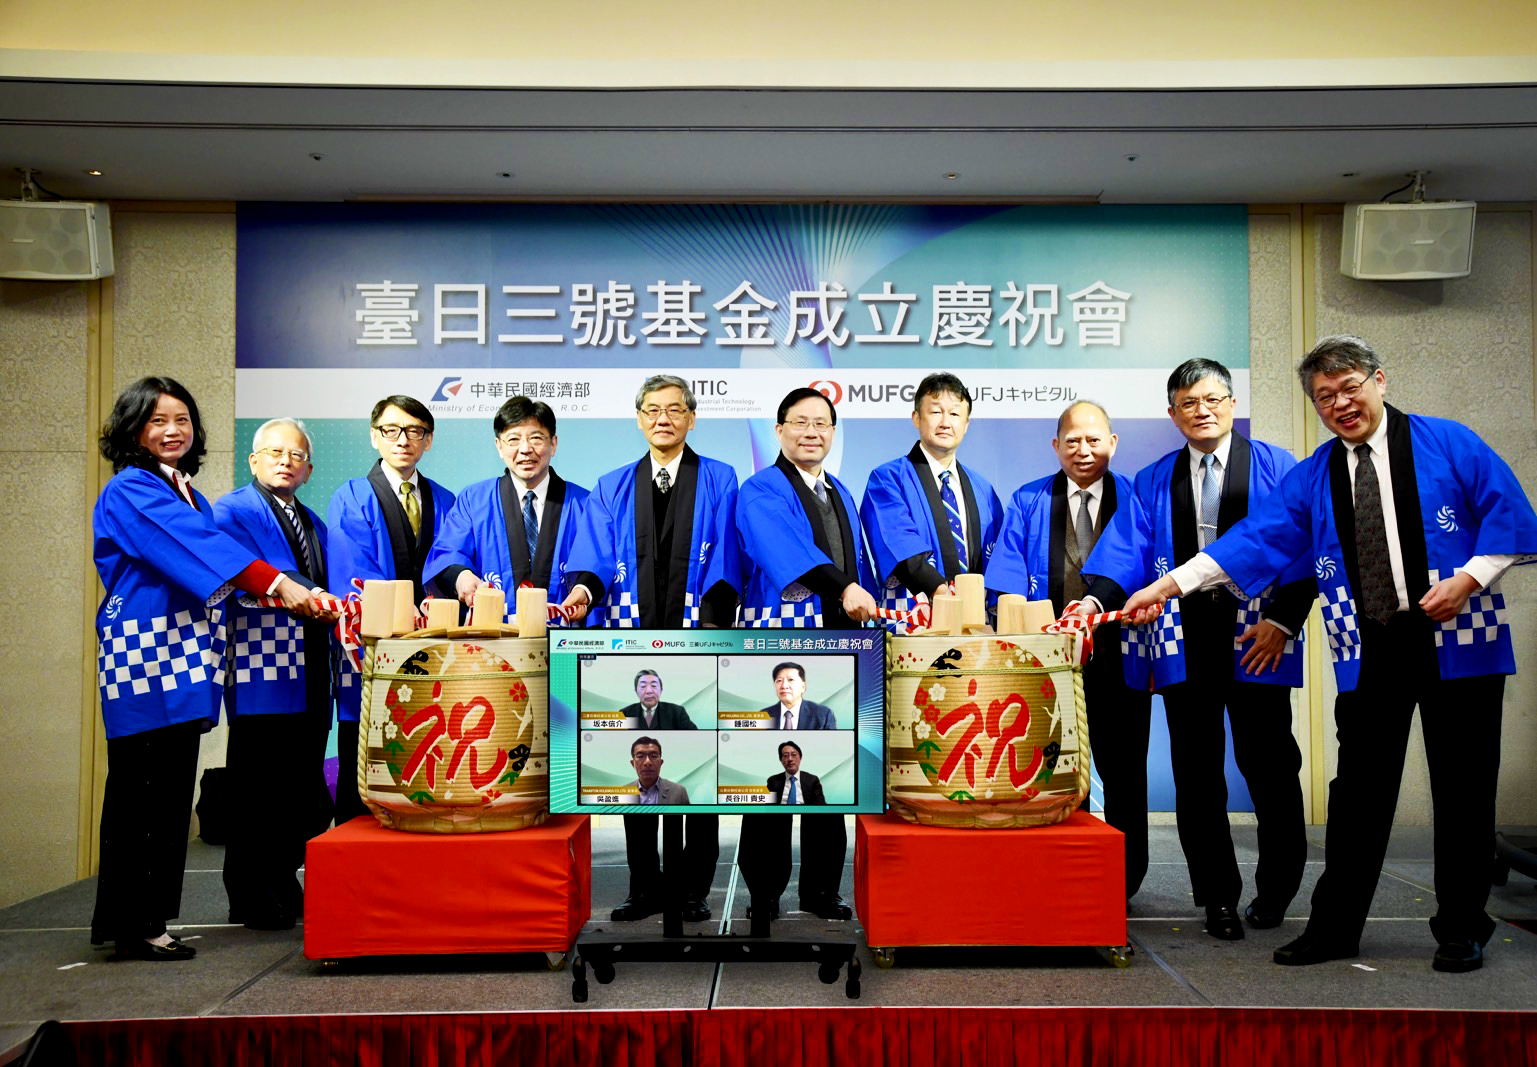 Representatives of limited partners from Japan and Taiwan celebrated the establishment of Golden Asia Fund III.